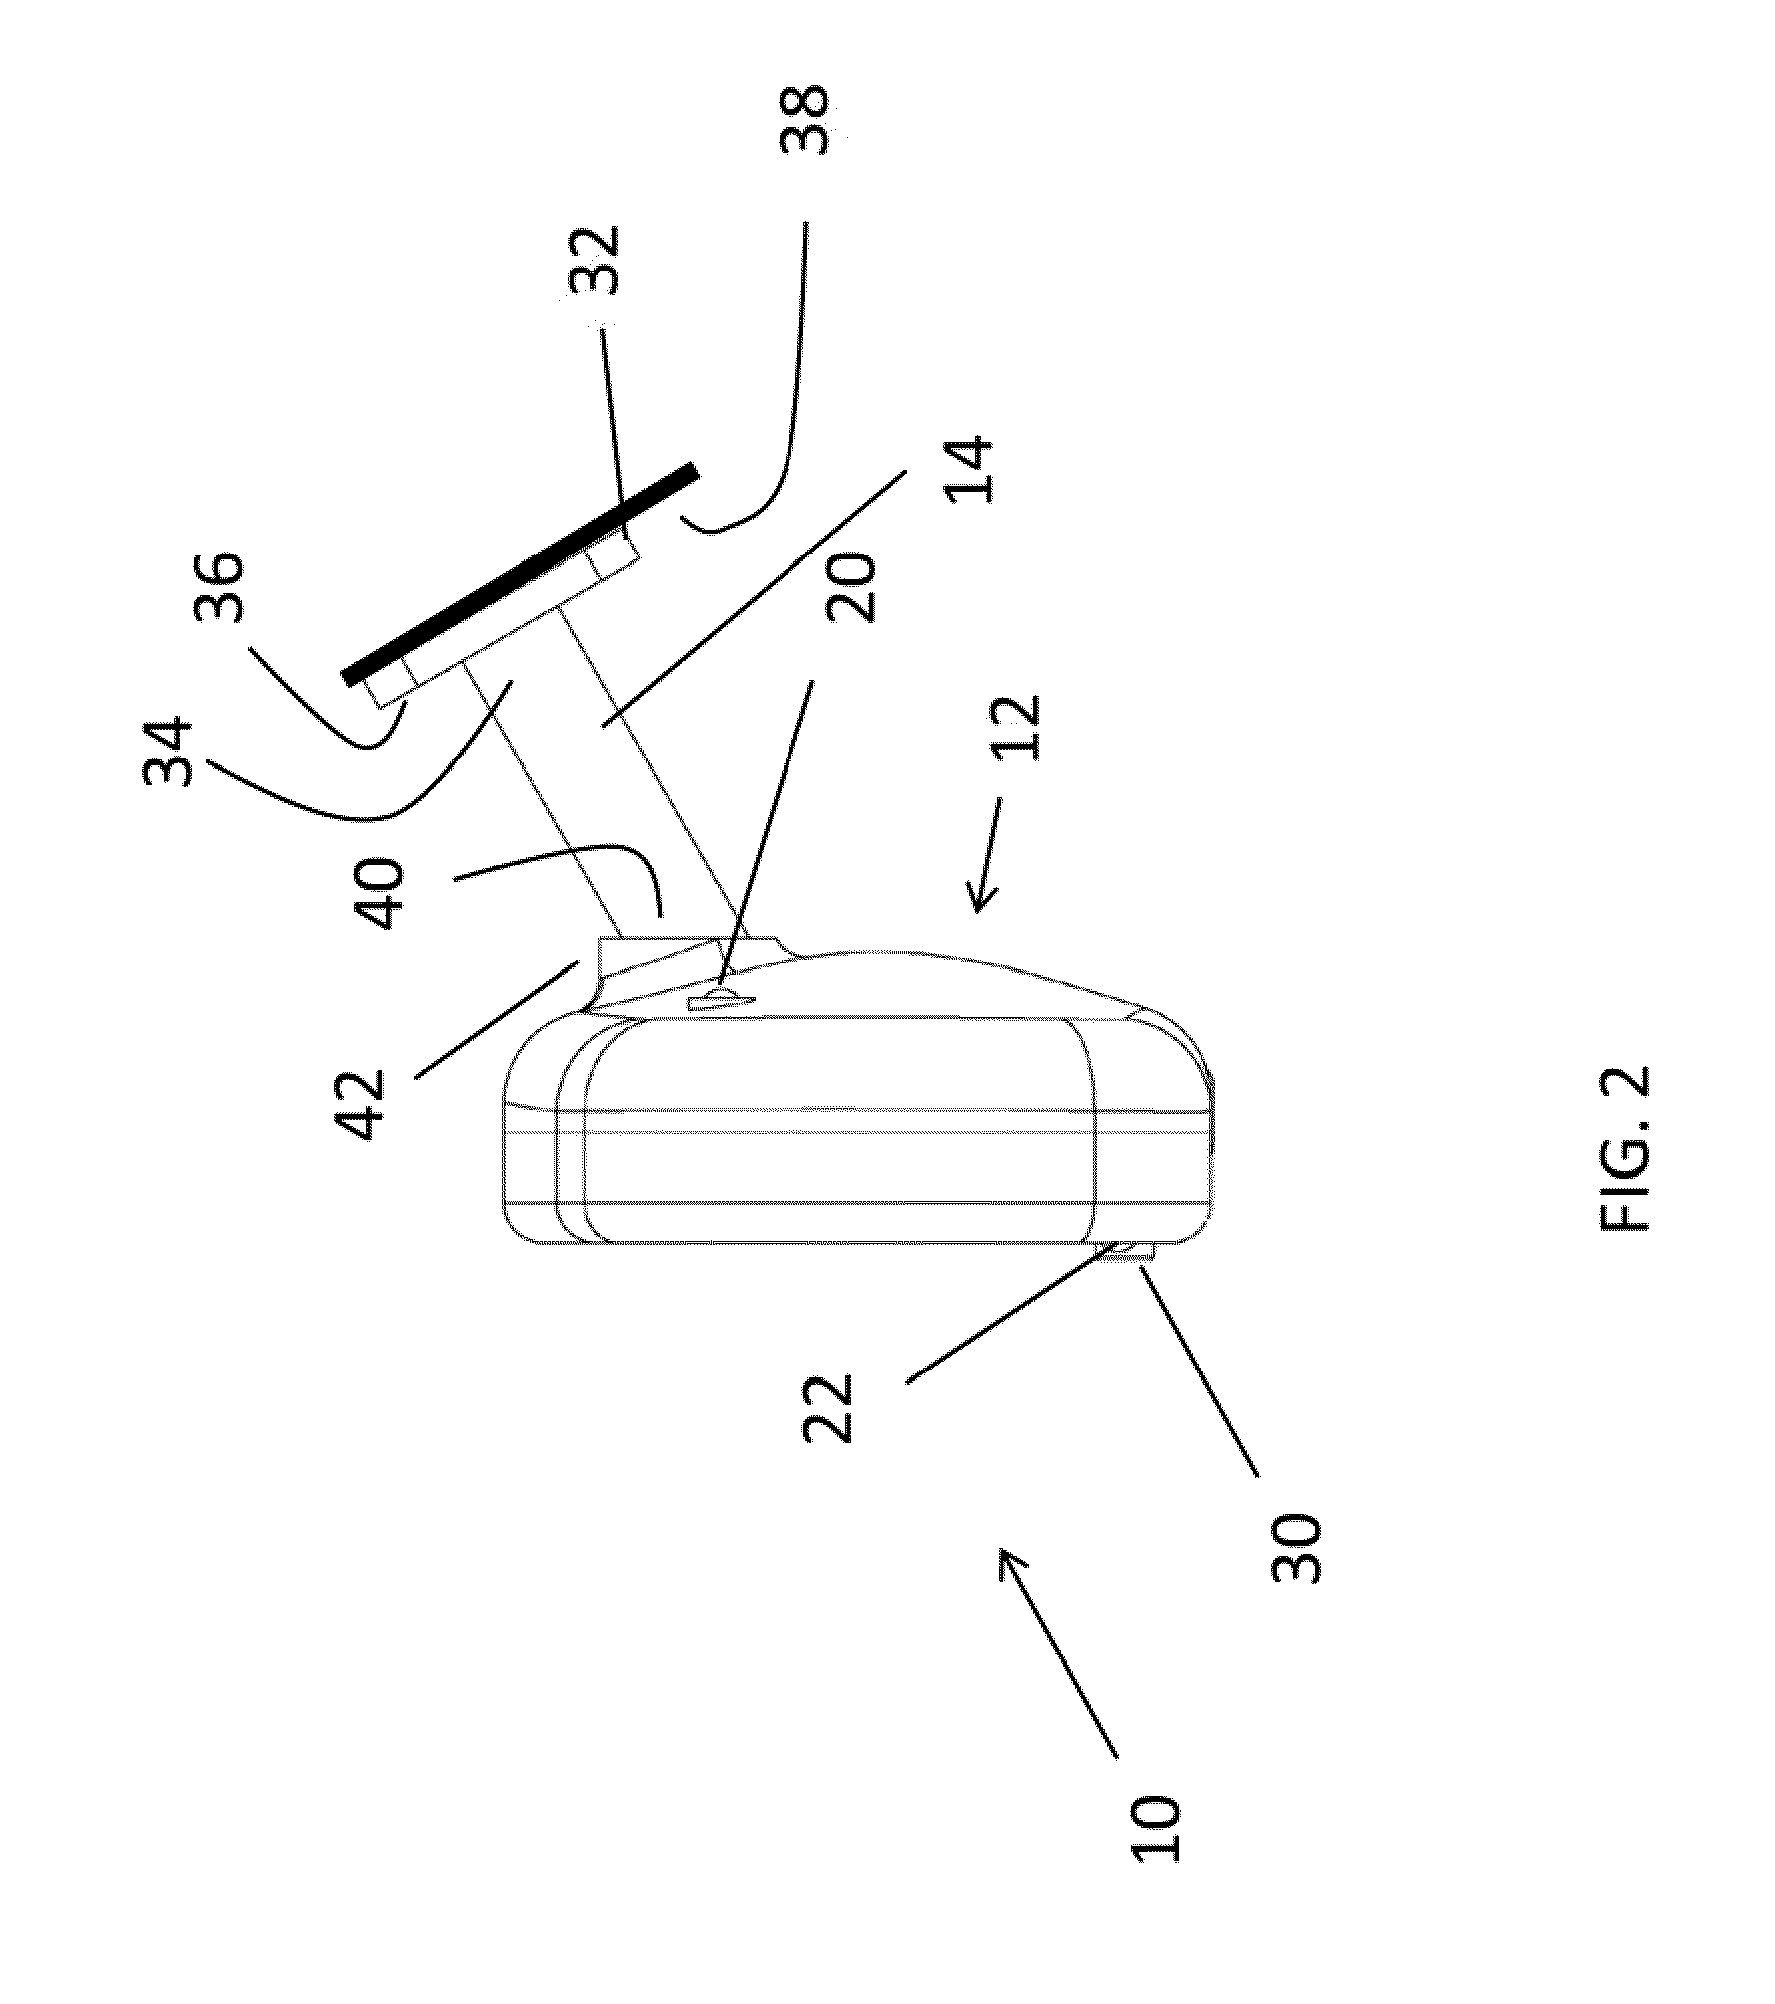 Automobile Rear View Mirror Assembly for Housing a Camera System and a Retractable Universal Mount